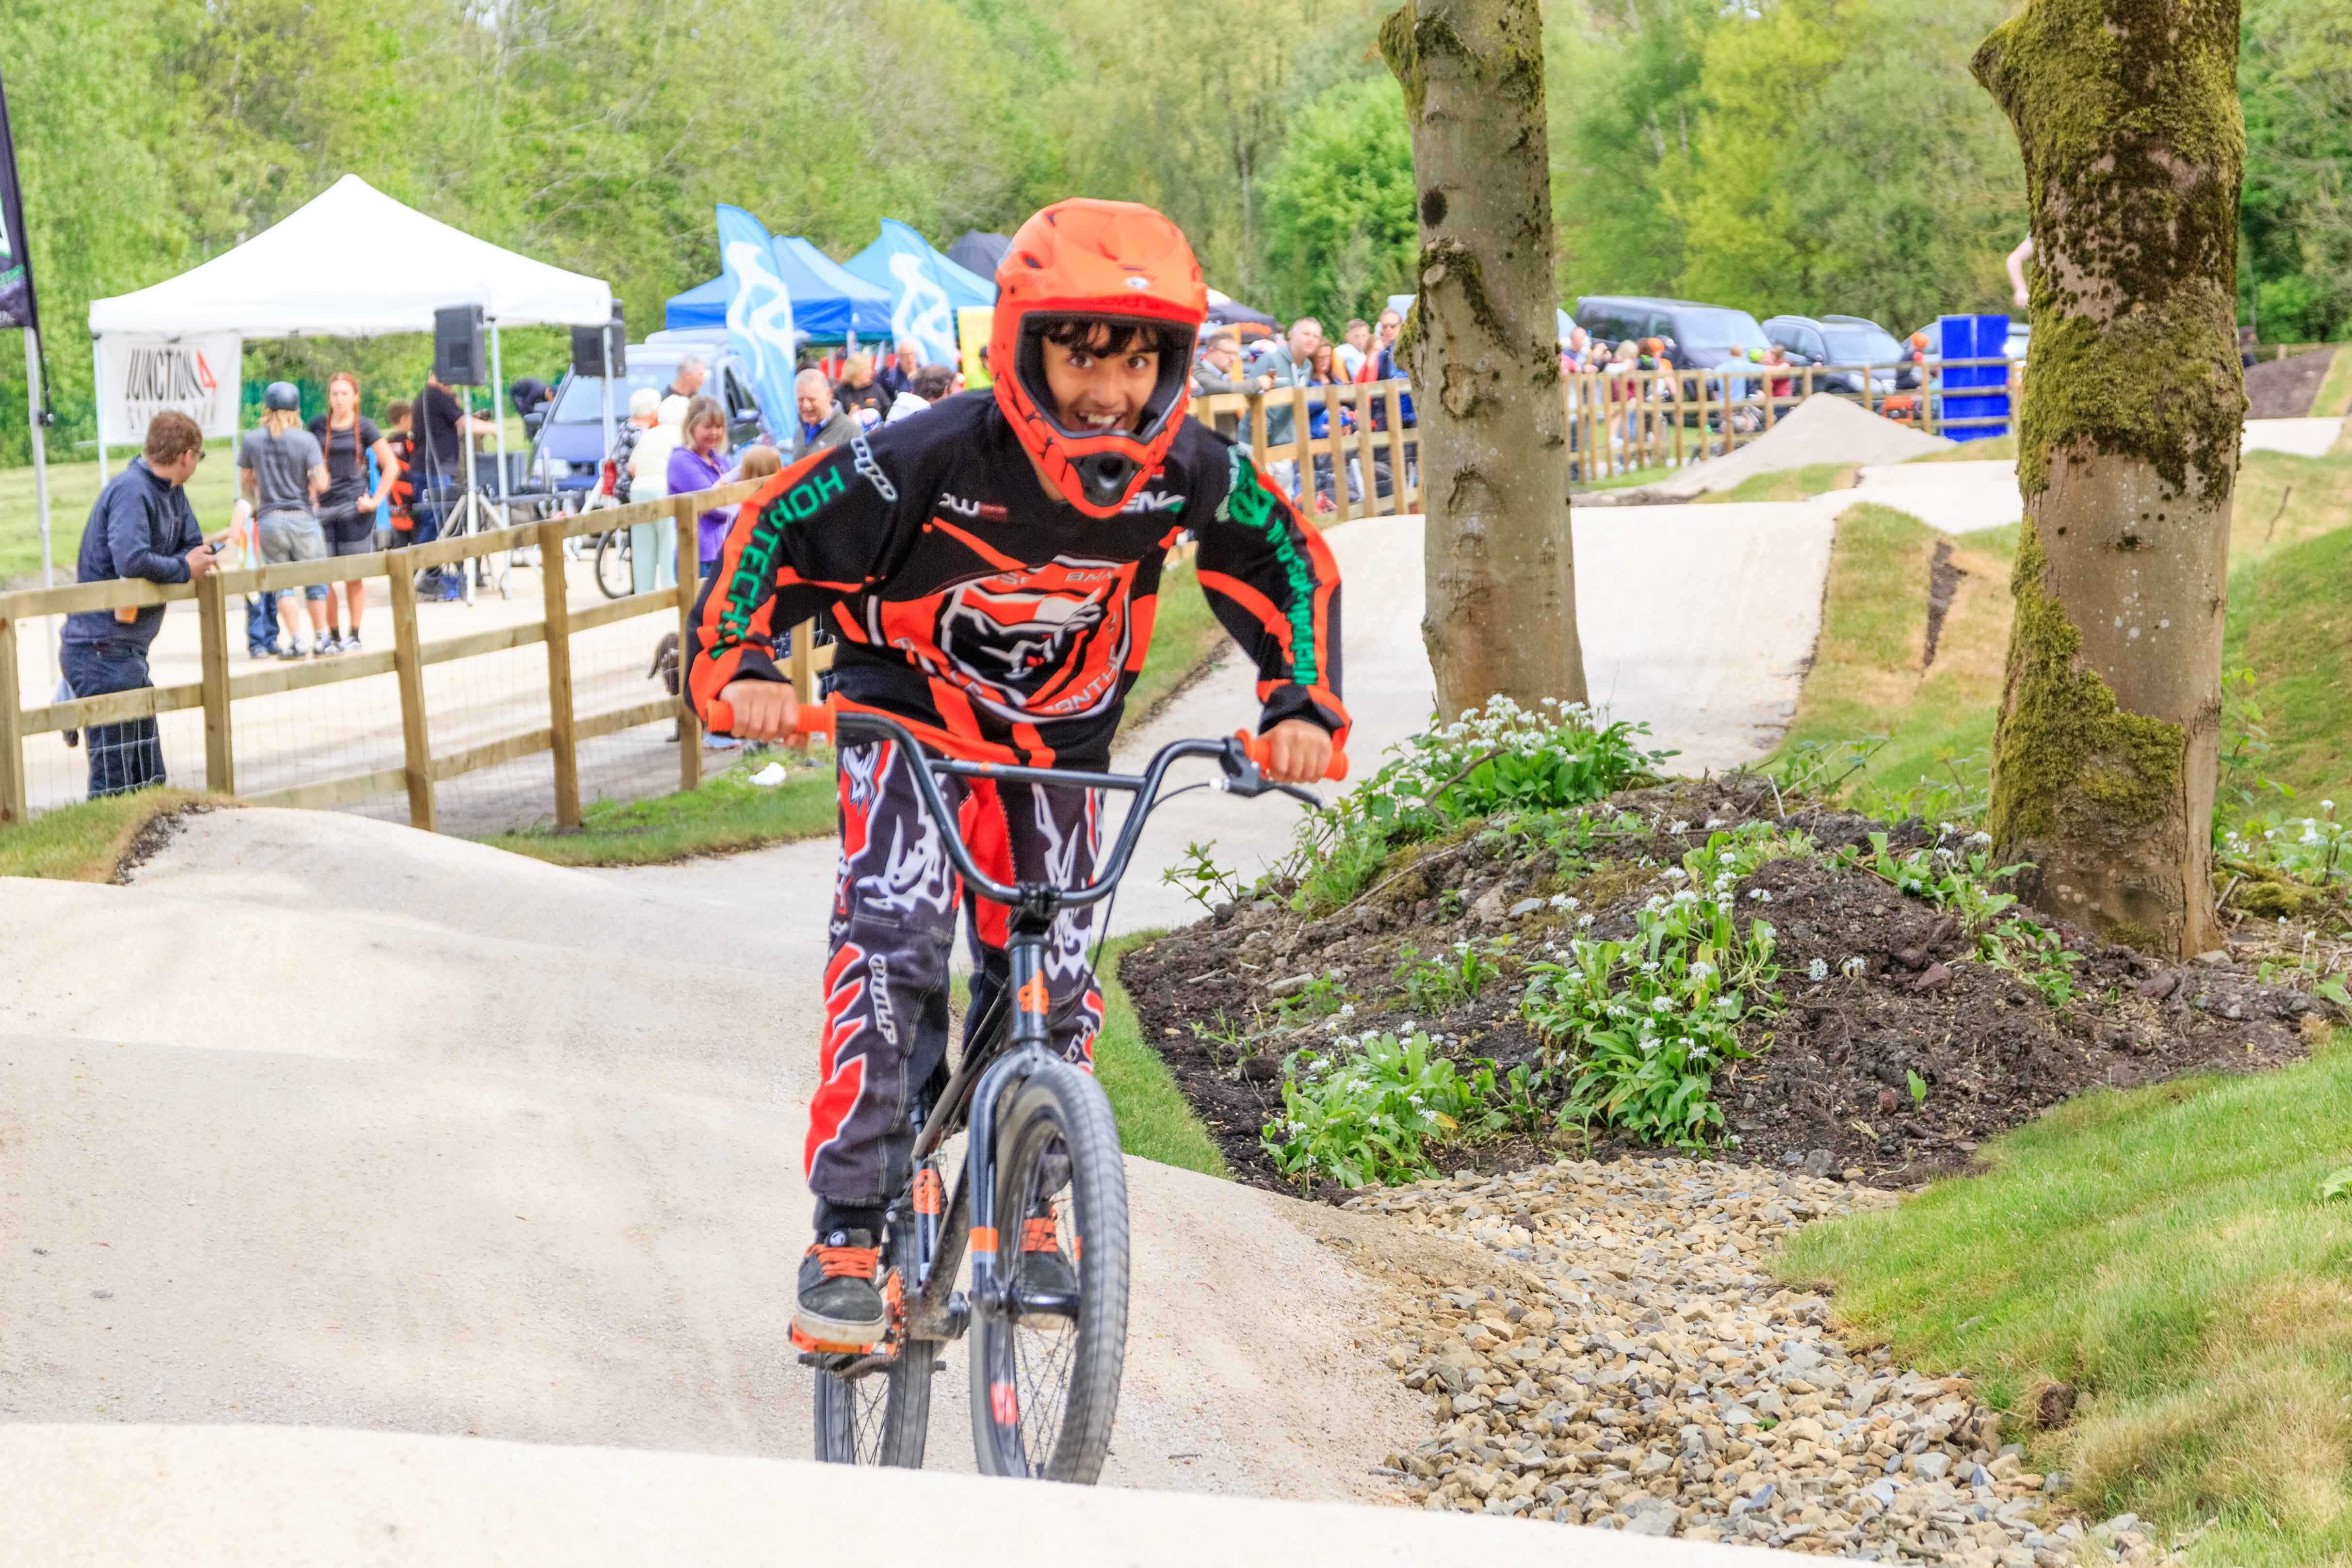 Come ride with us! Try the Steven Burke cycle circuit and BMX pump track